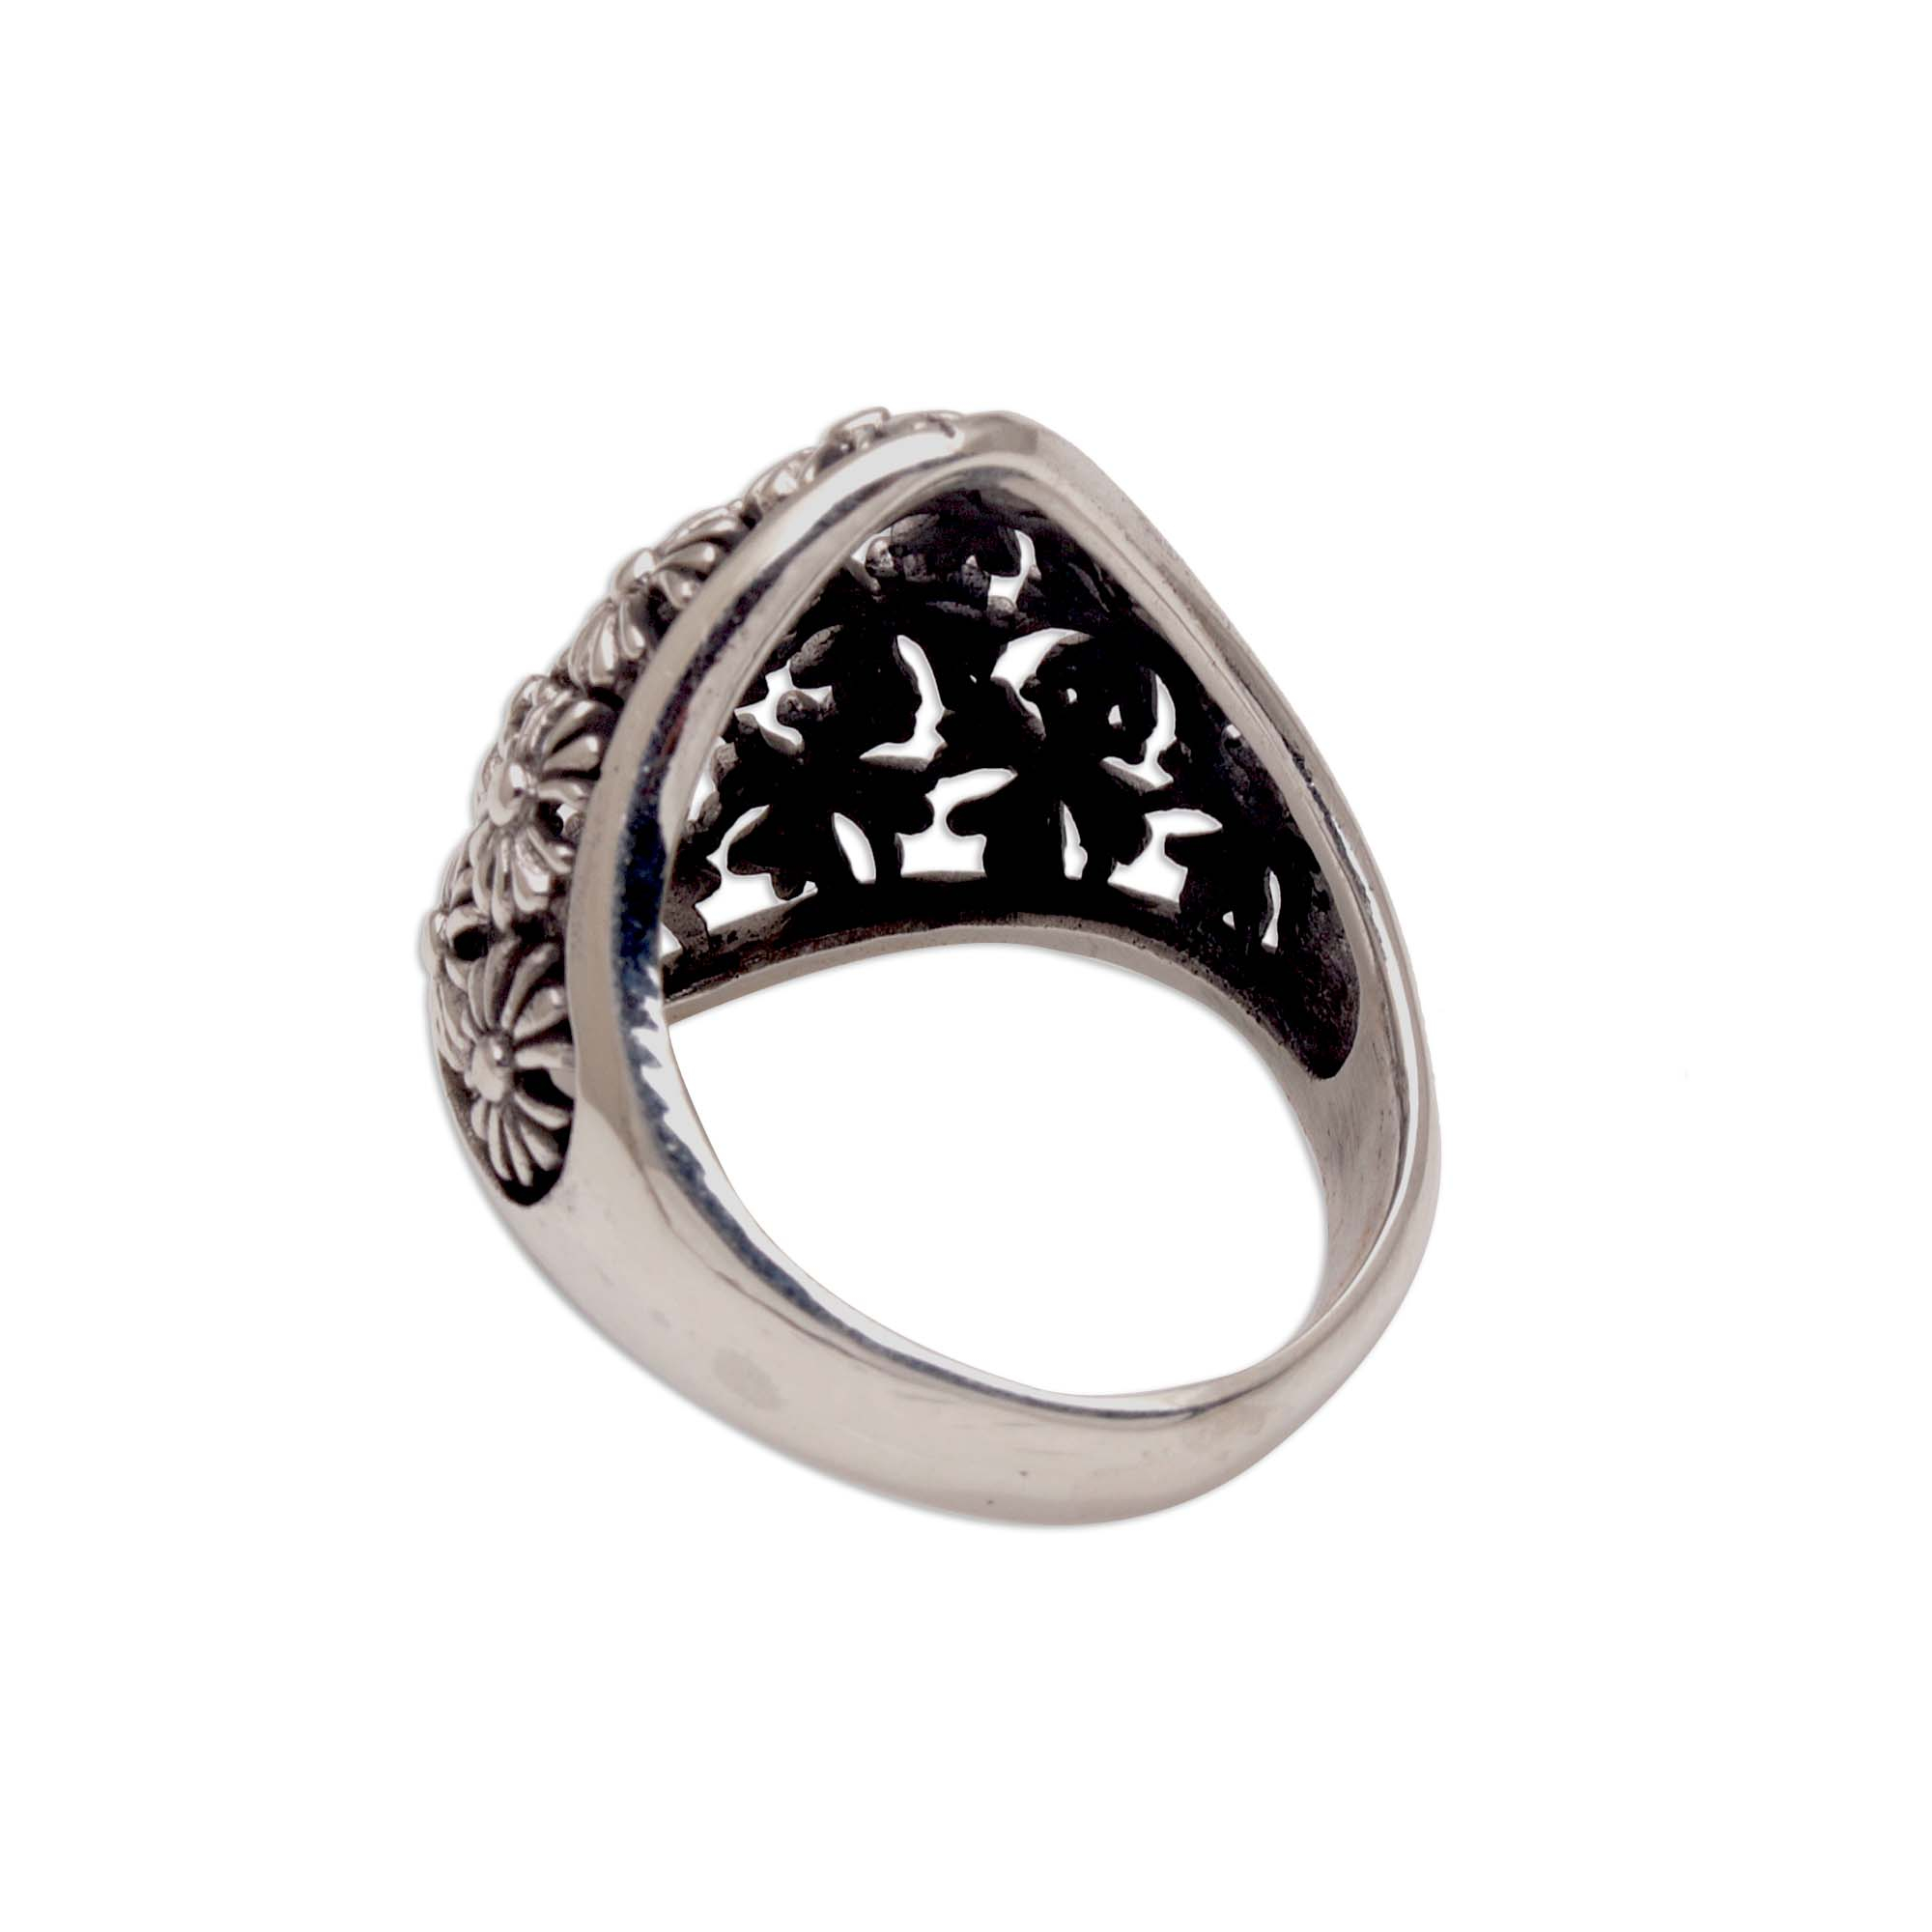 Handmade 925 Sterling Silver Floral Cocktail Ring - Sunflower Delight ...